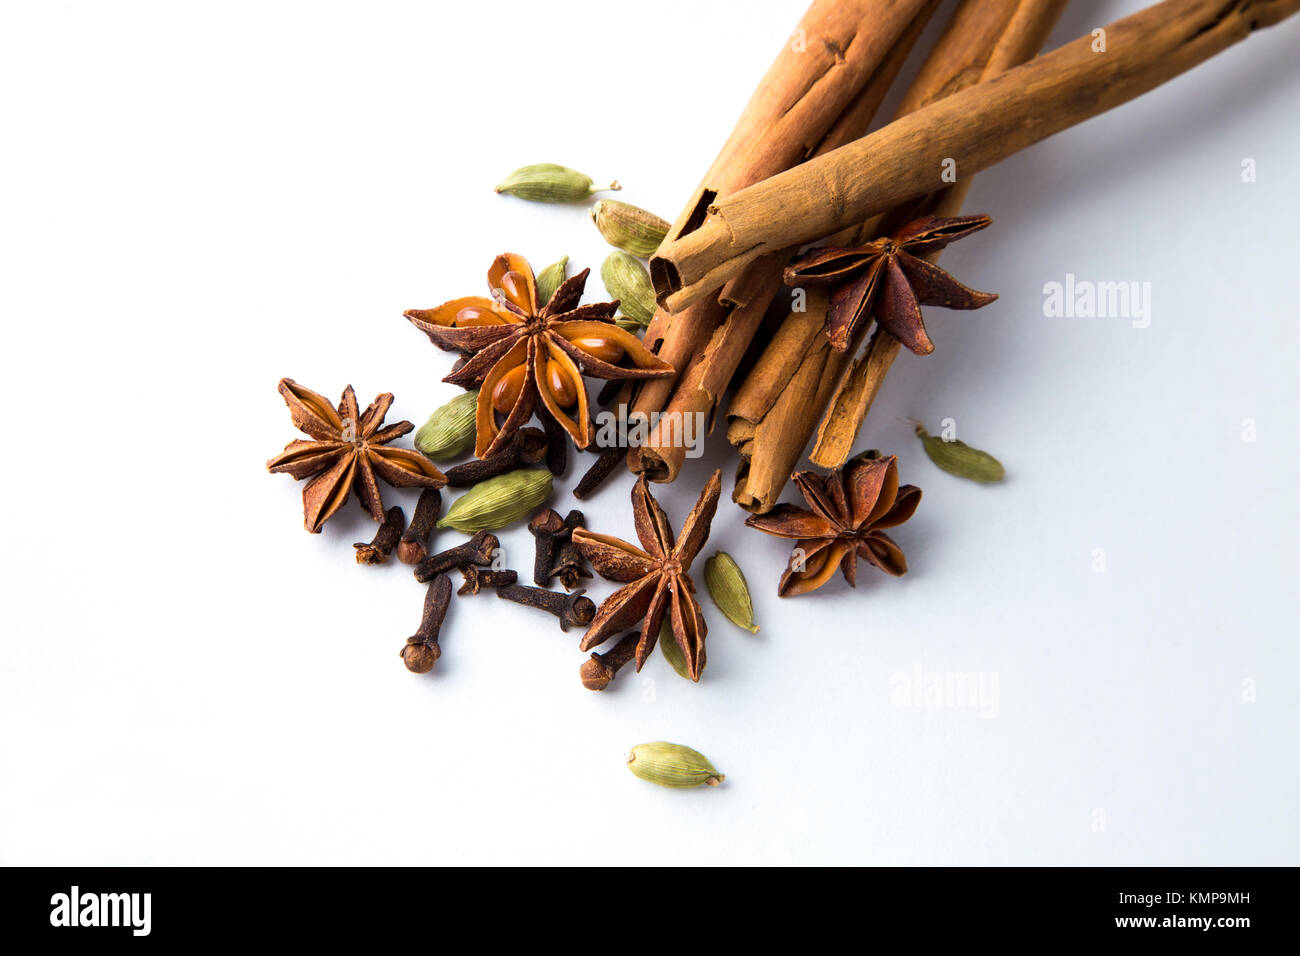 Aromatic and warming dried ayurveda spices (cinnamon, star anise, cardamom, cloves) on a white background Stock Photo